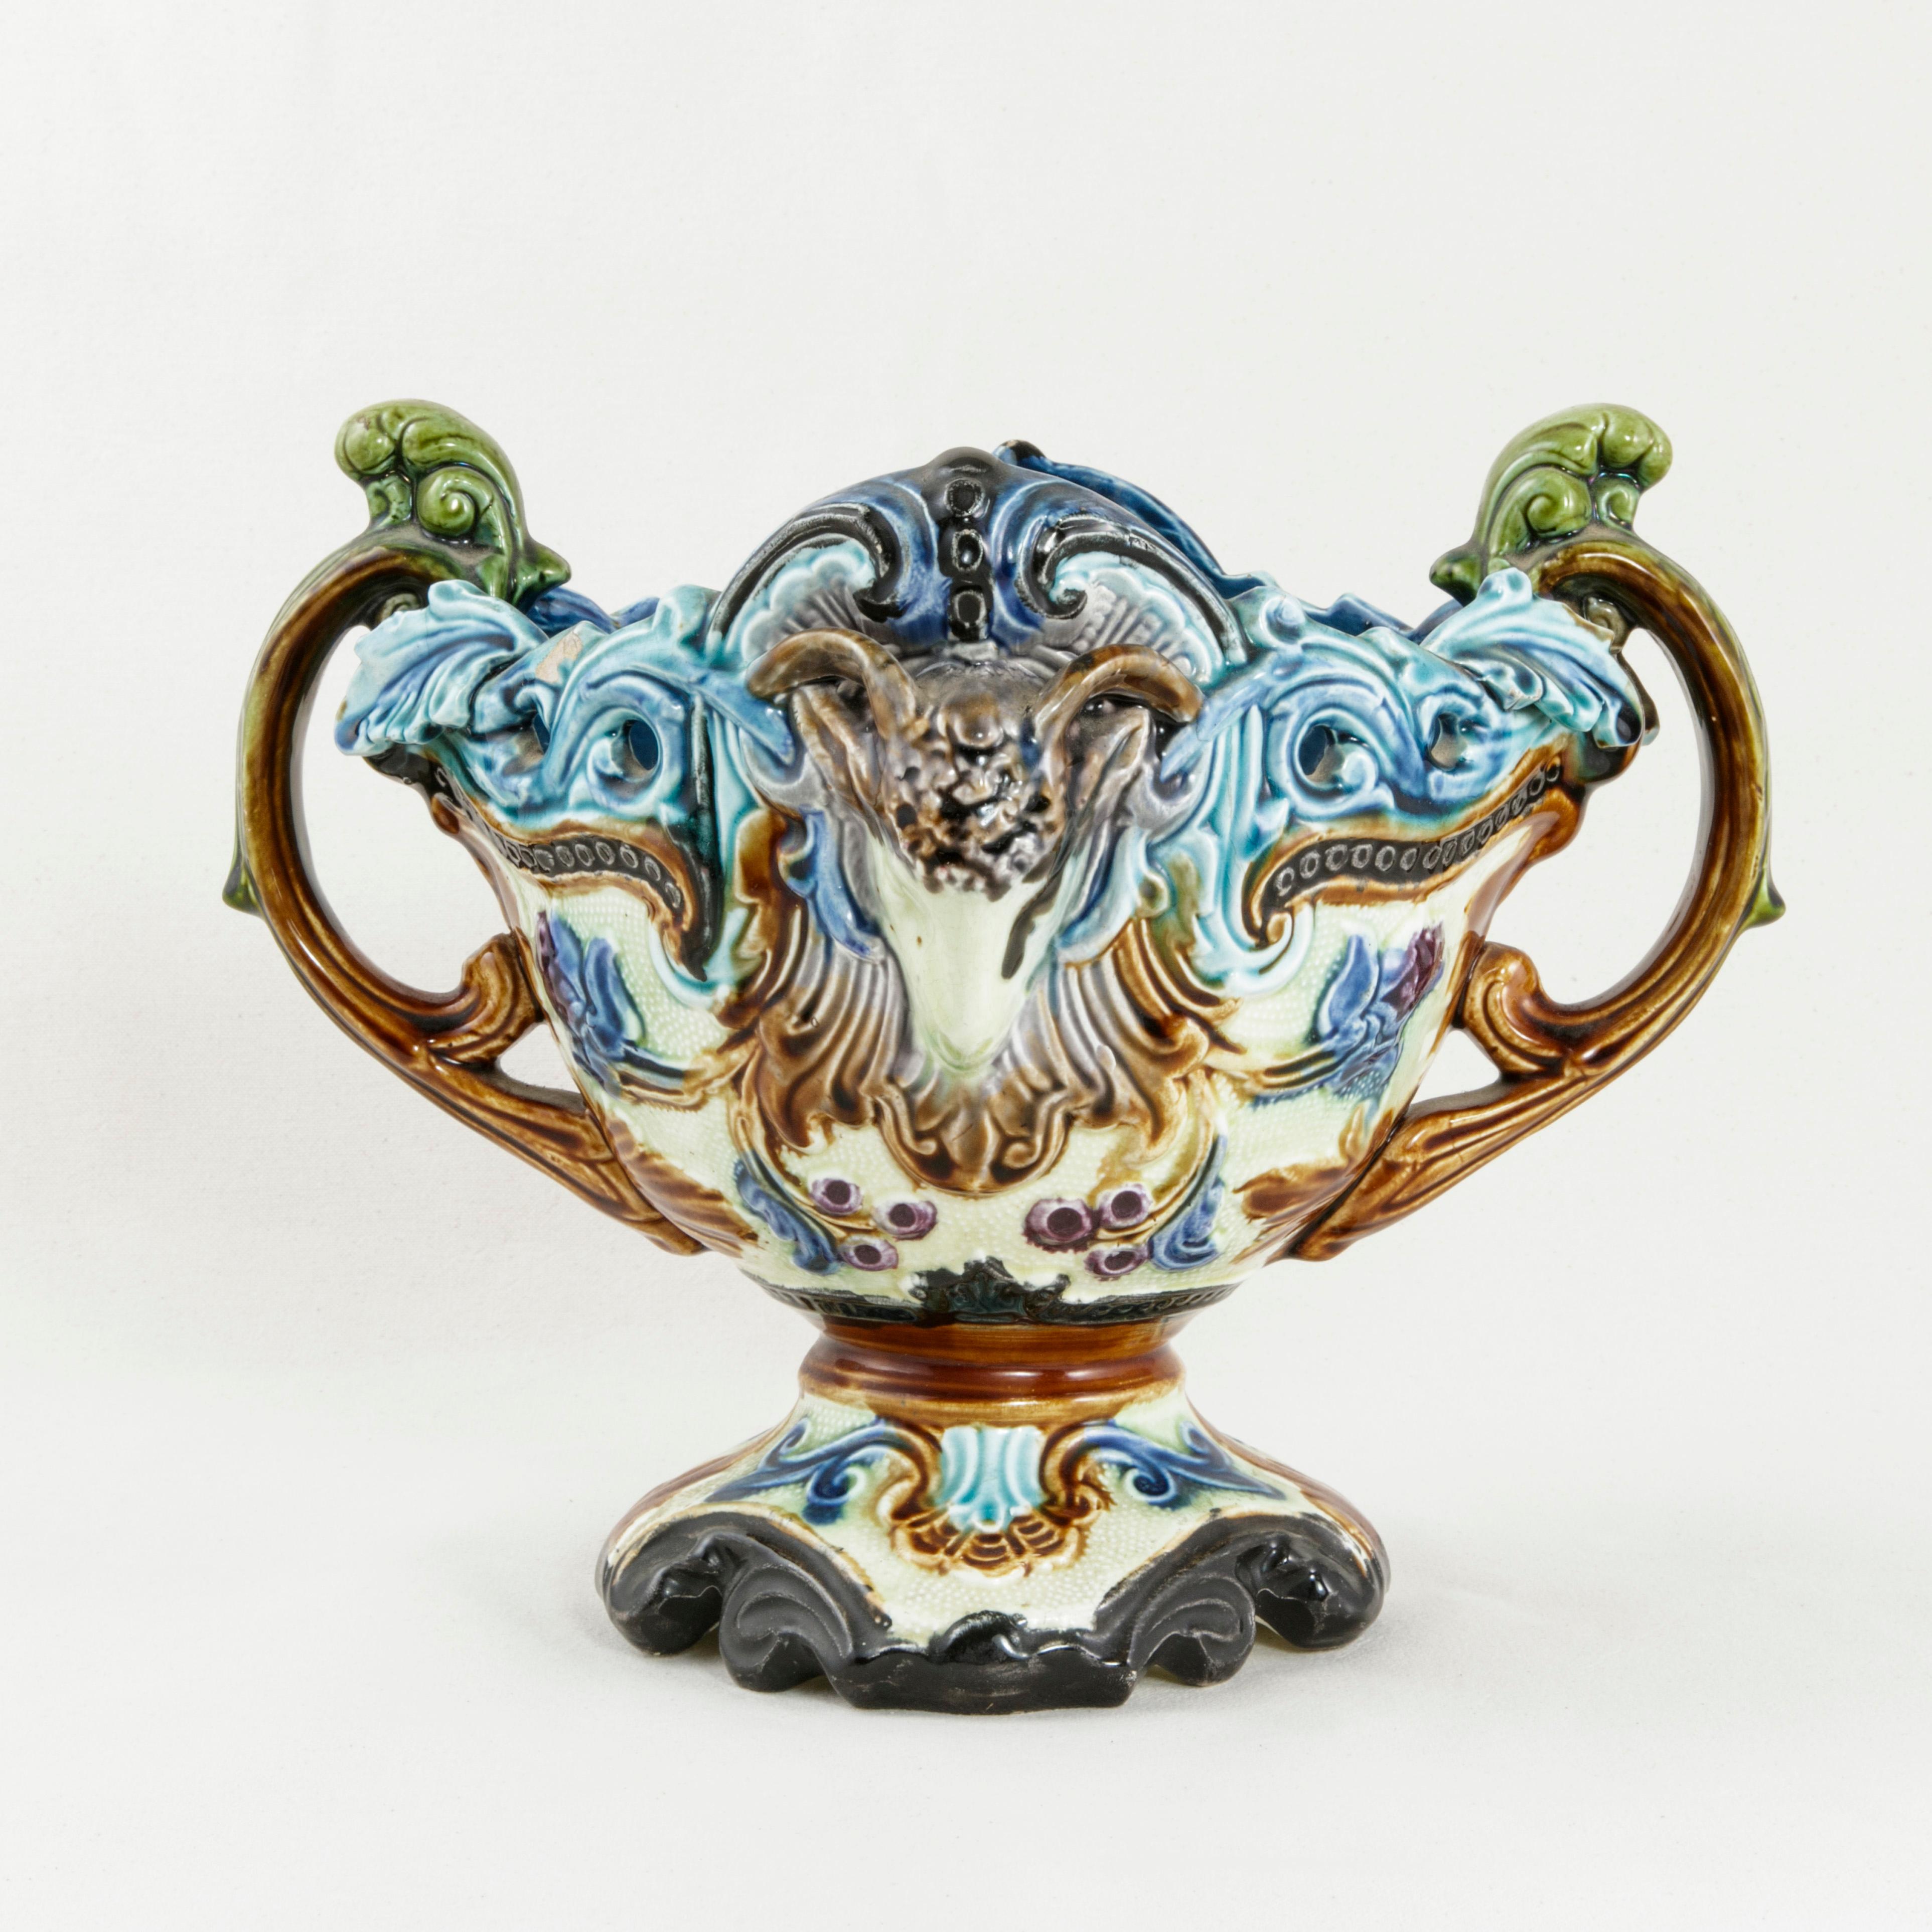 This vibrantly colored French Majolica cachepot from the late nineteenth century features rams' heads on both sides surrounded by flora and scrolling leaves. Green leaves form handles on opposing sides, circa 1880.